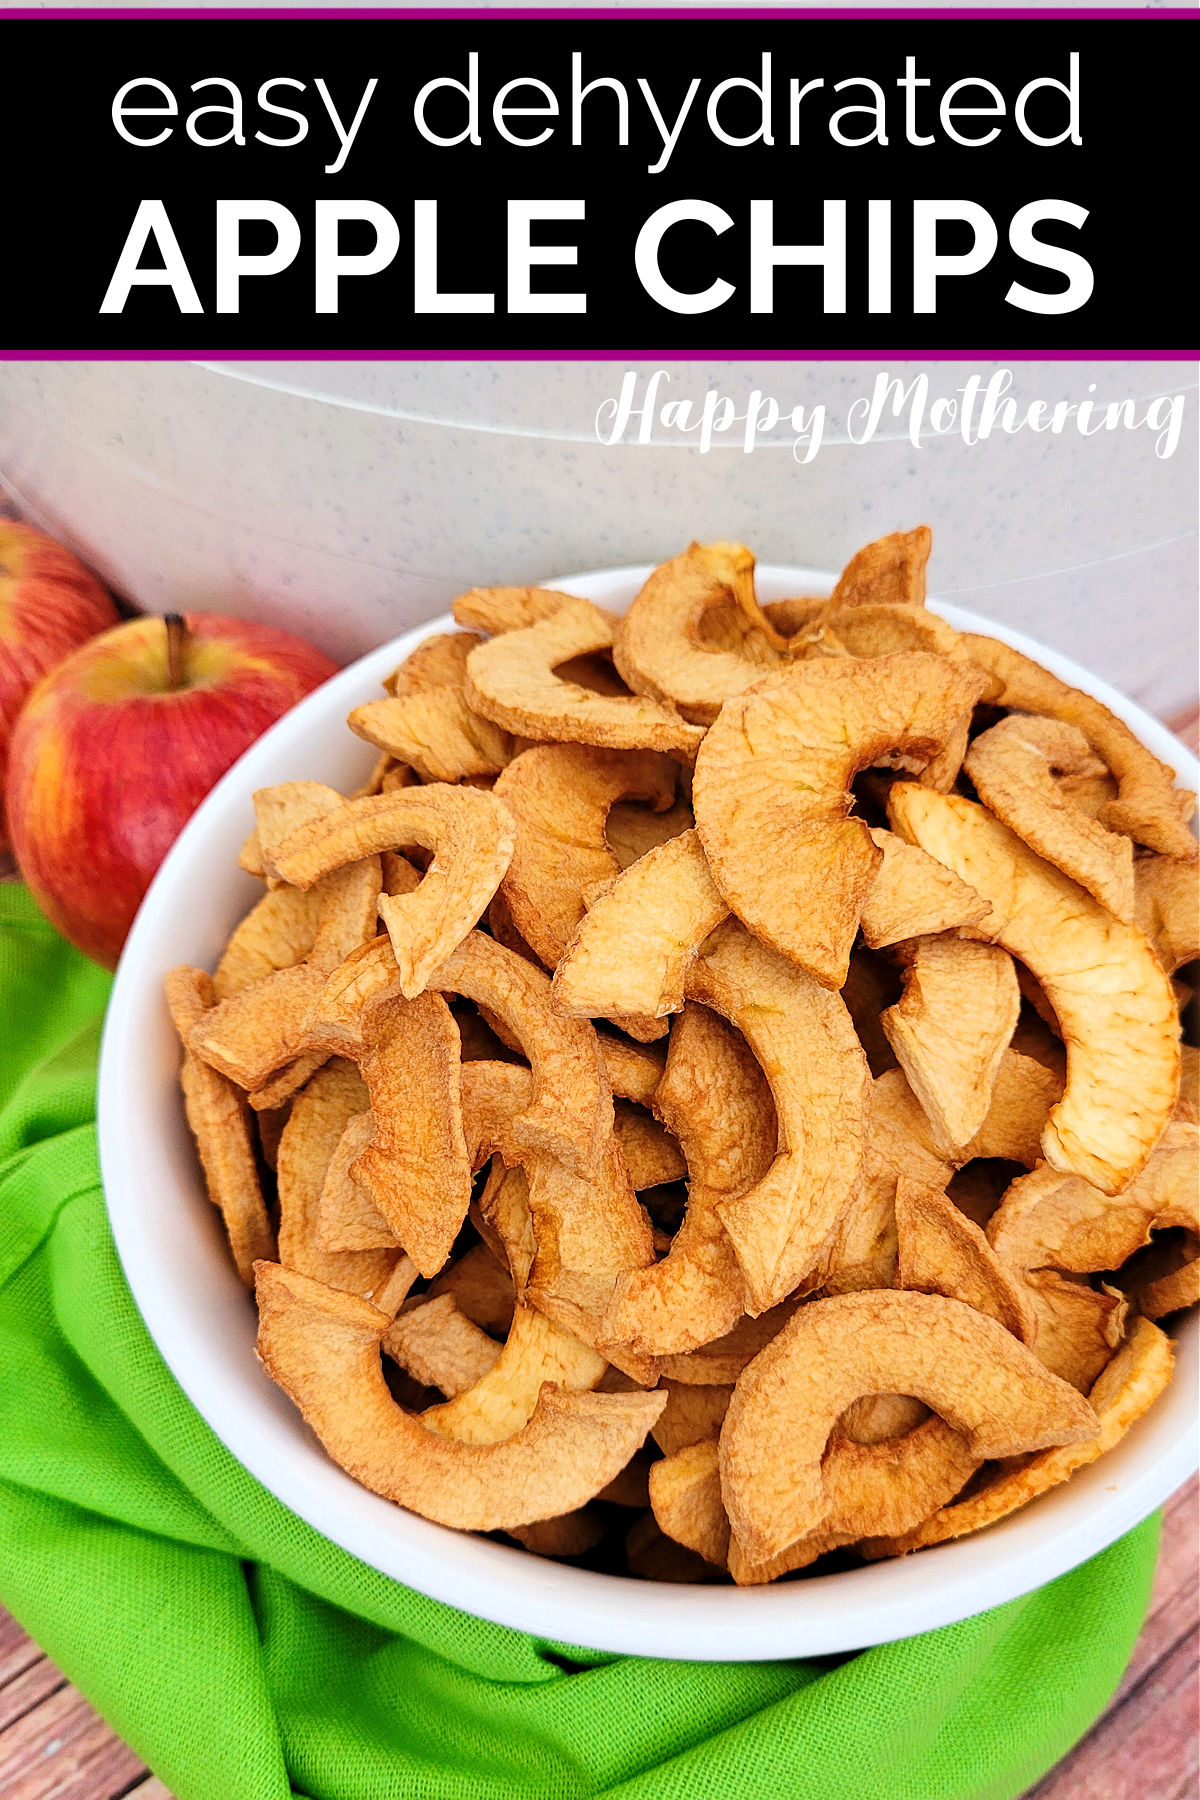 Bowl of homemade apple chips in front of food dehydrator.